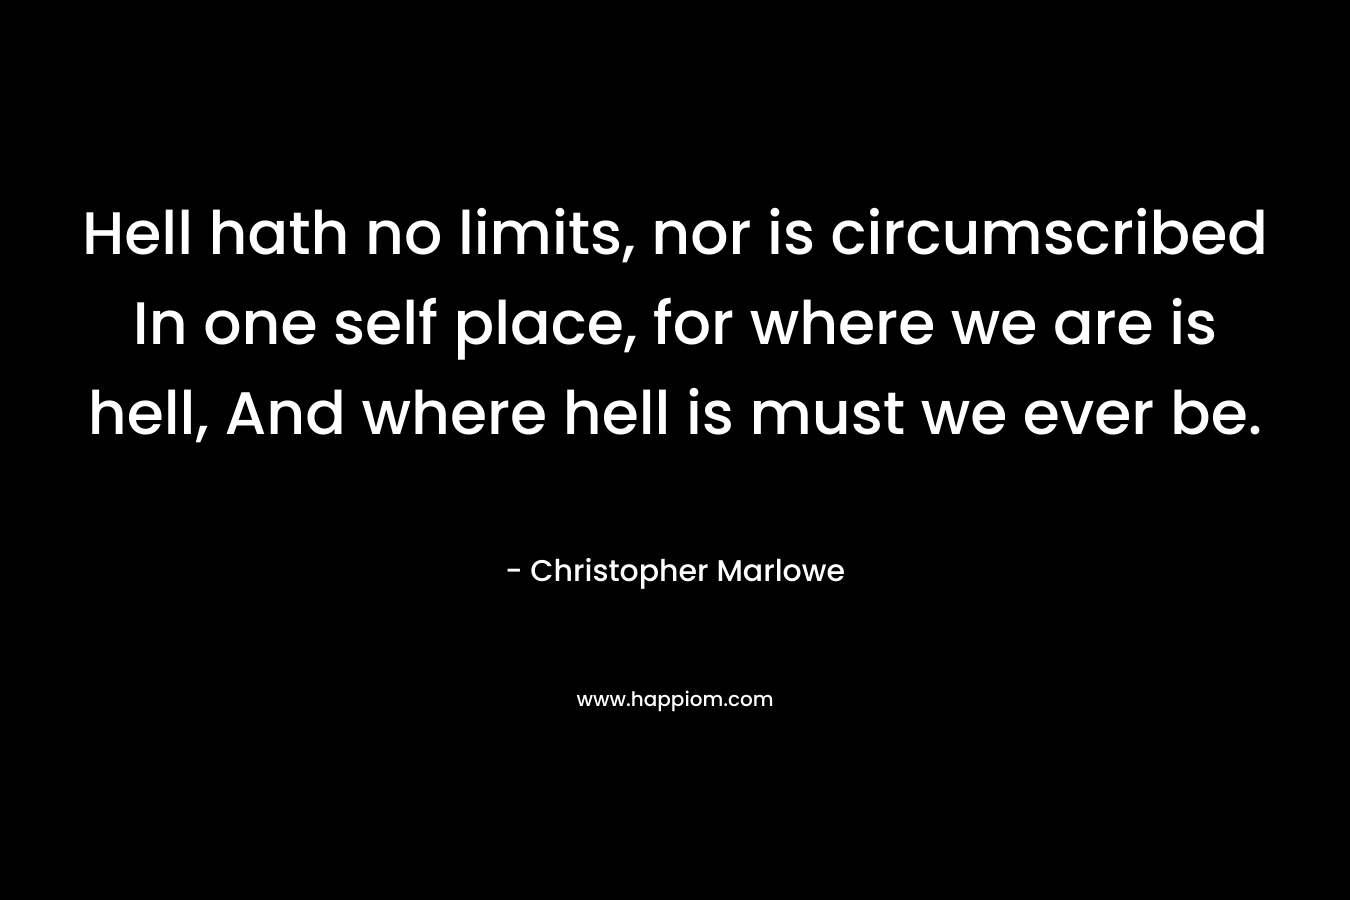 Hell hath no limits, nor is circumscribed In one self place, for where we are is hell, And where hell is must we ever be.